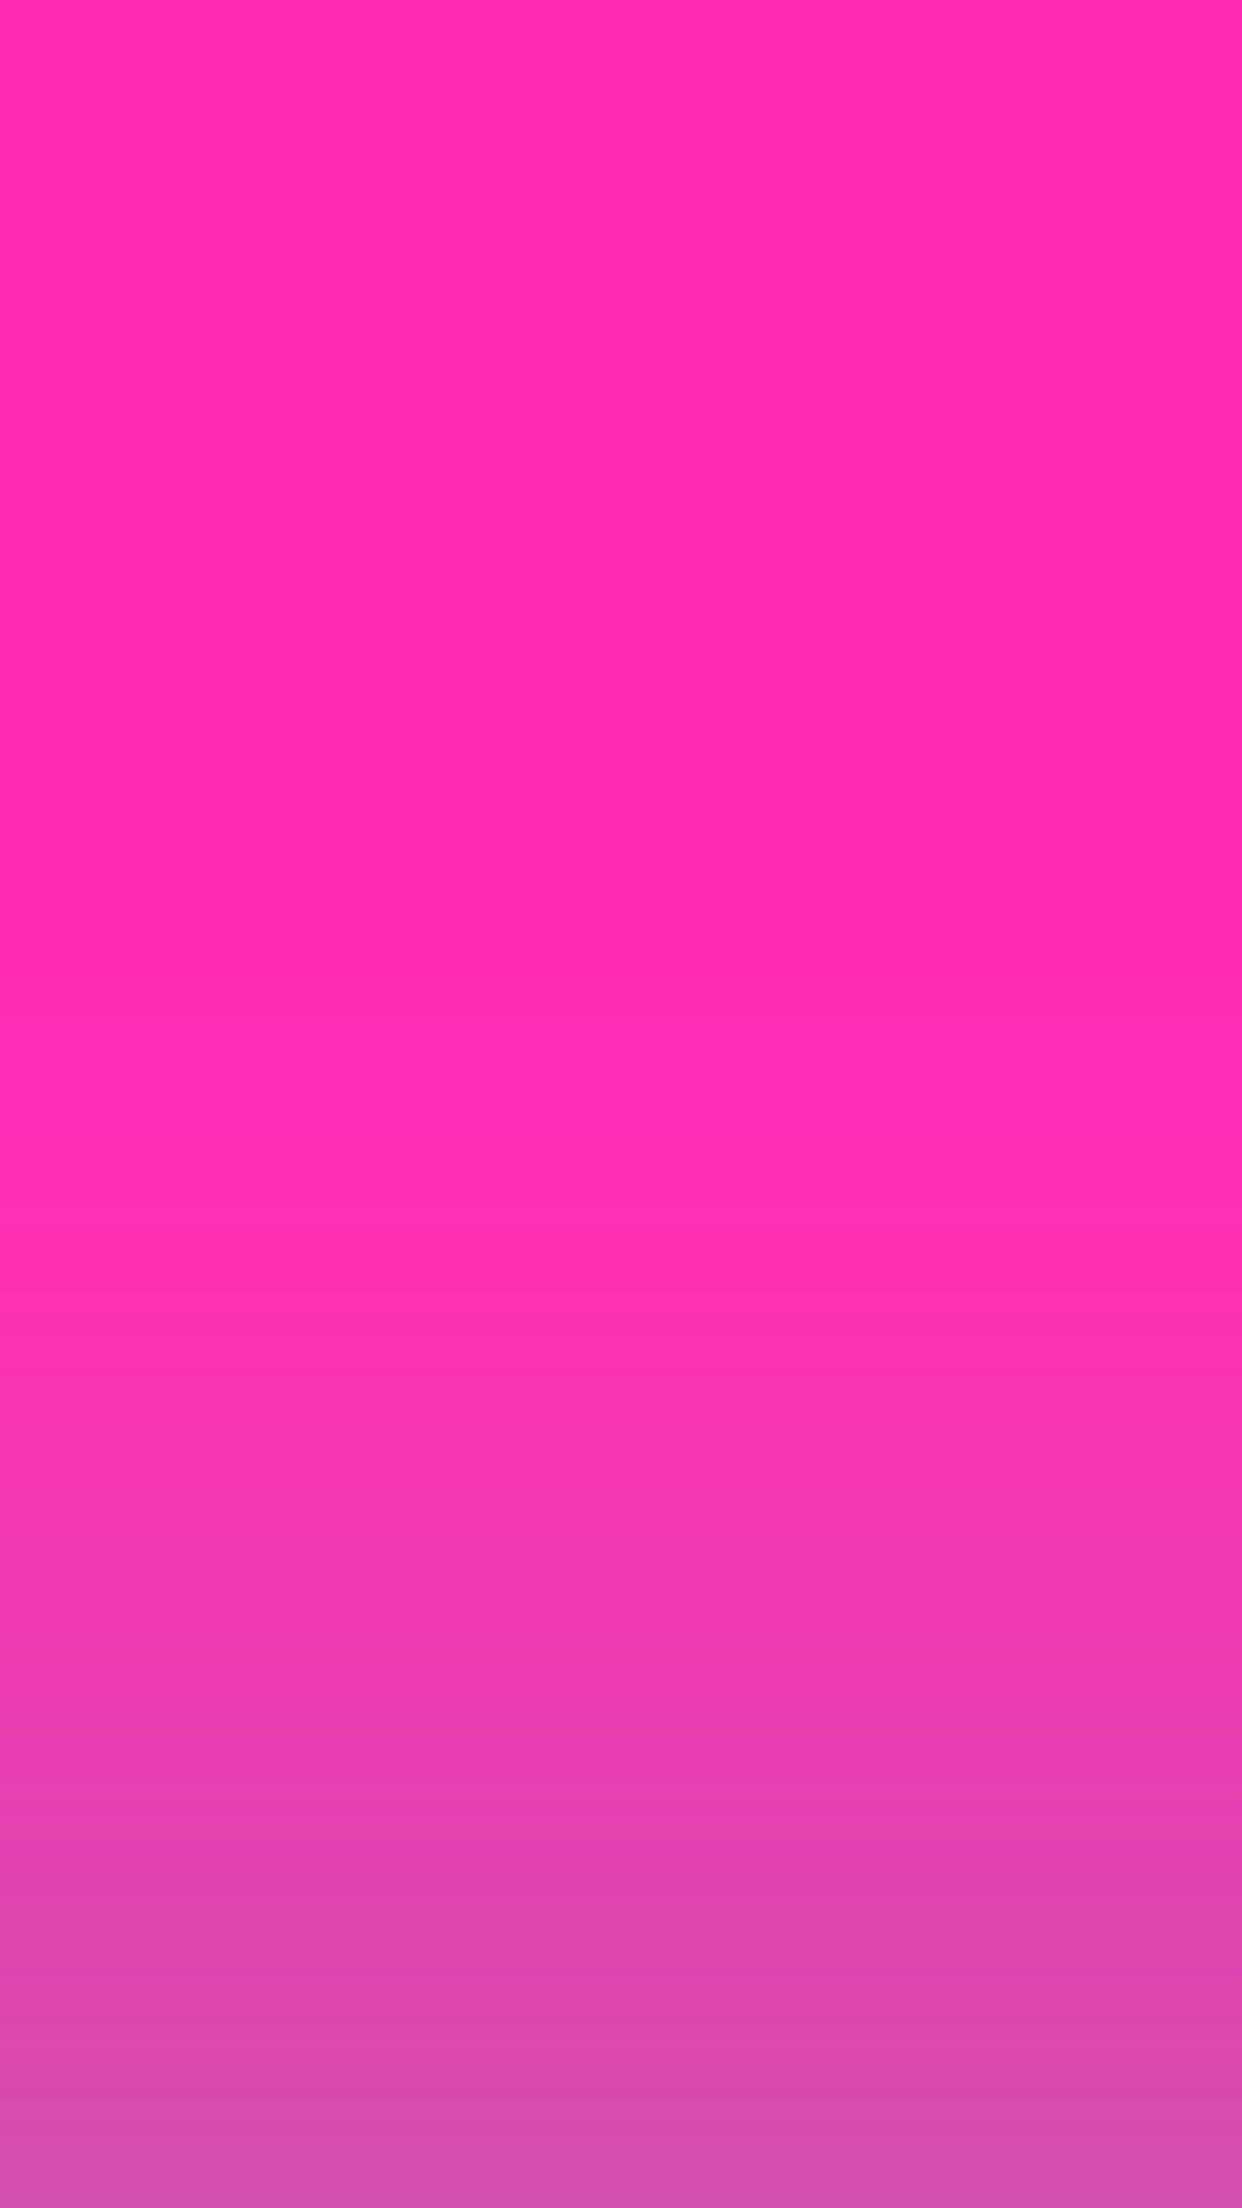 Free download 78 Pink Ombre Wallpapers